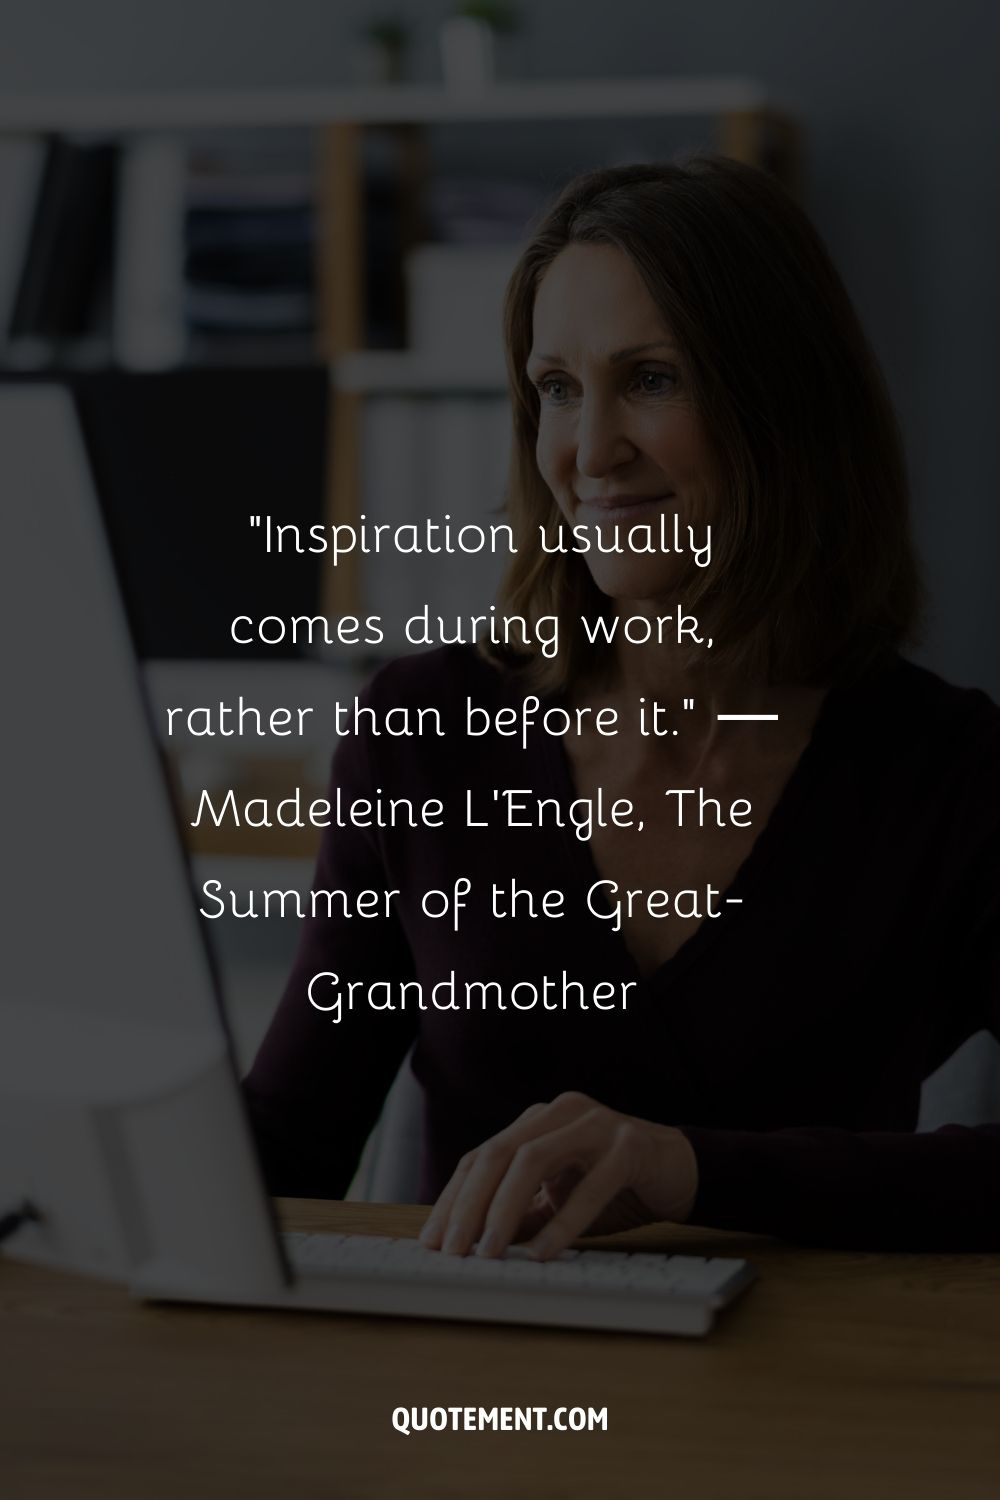 “Inspiration usually comes during work, rather than before it.” ― Madeleine L'Engle, The Summer of the Great-Grandmother